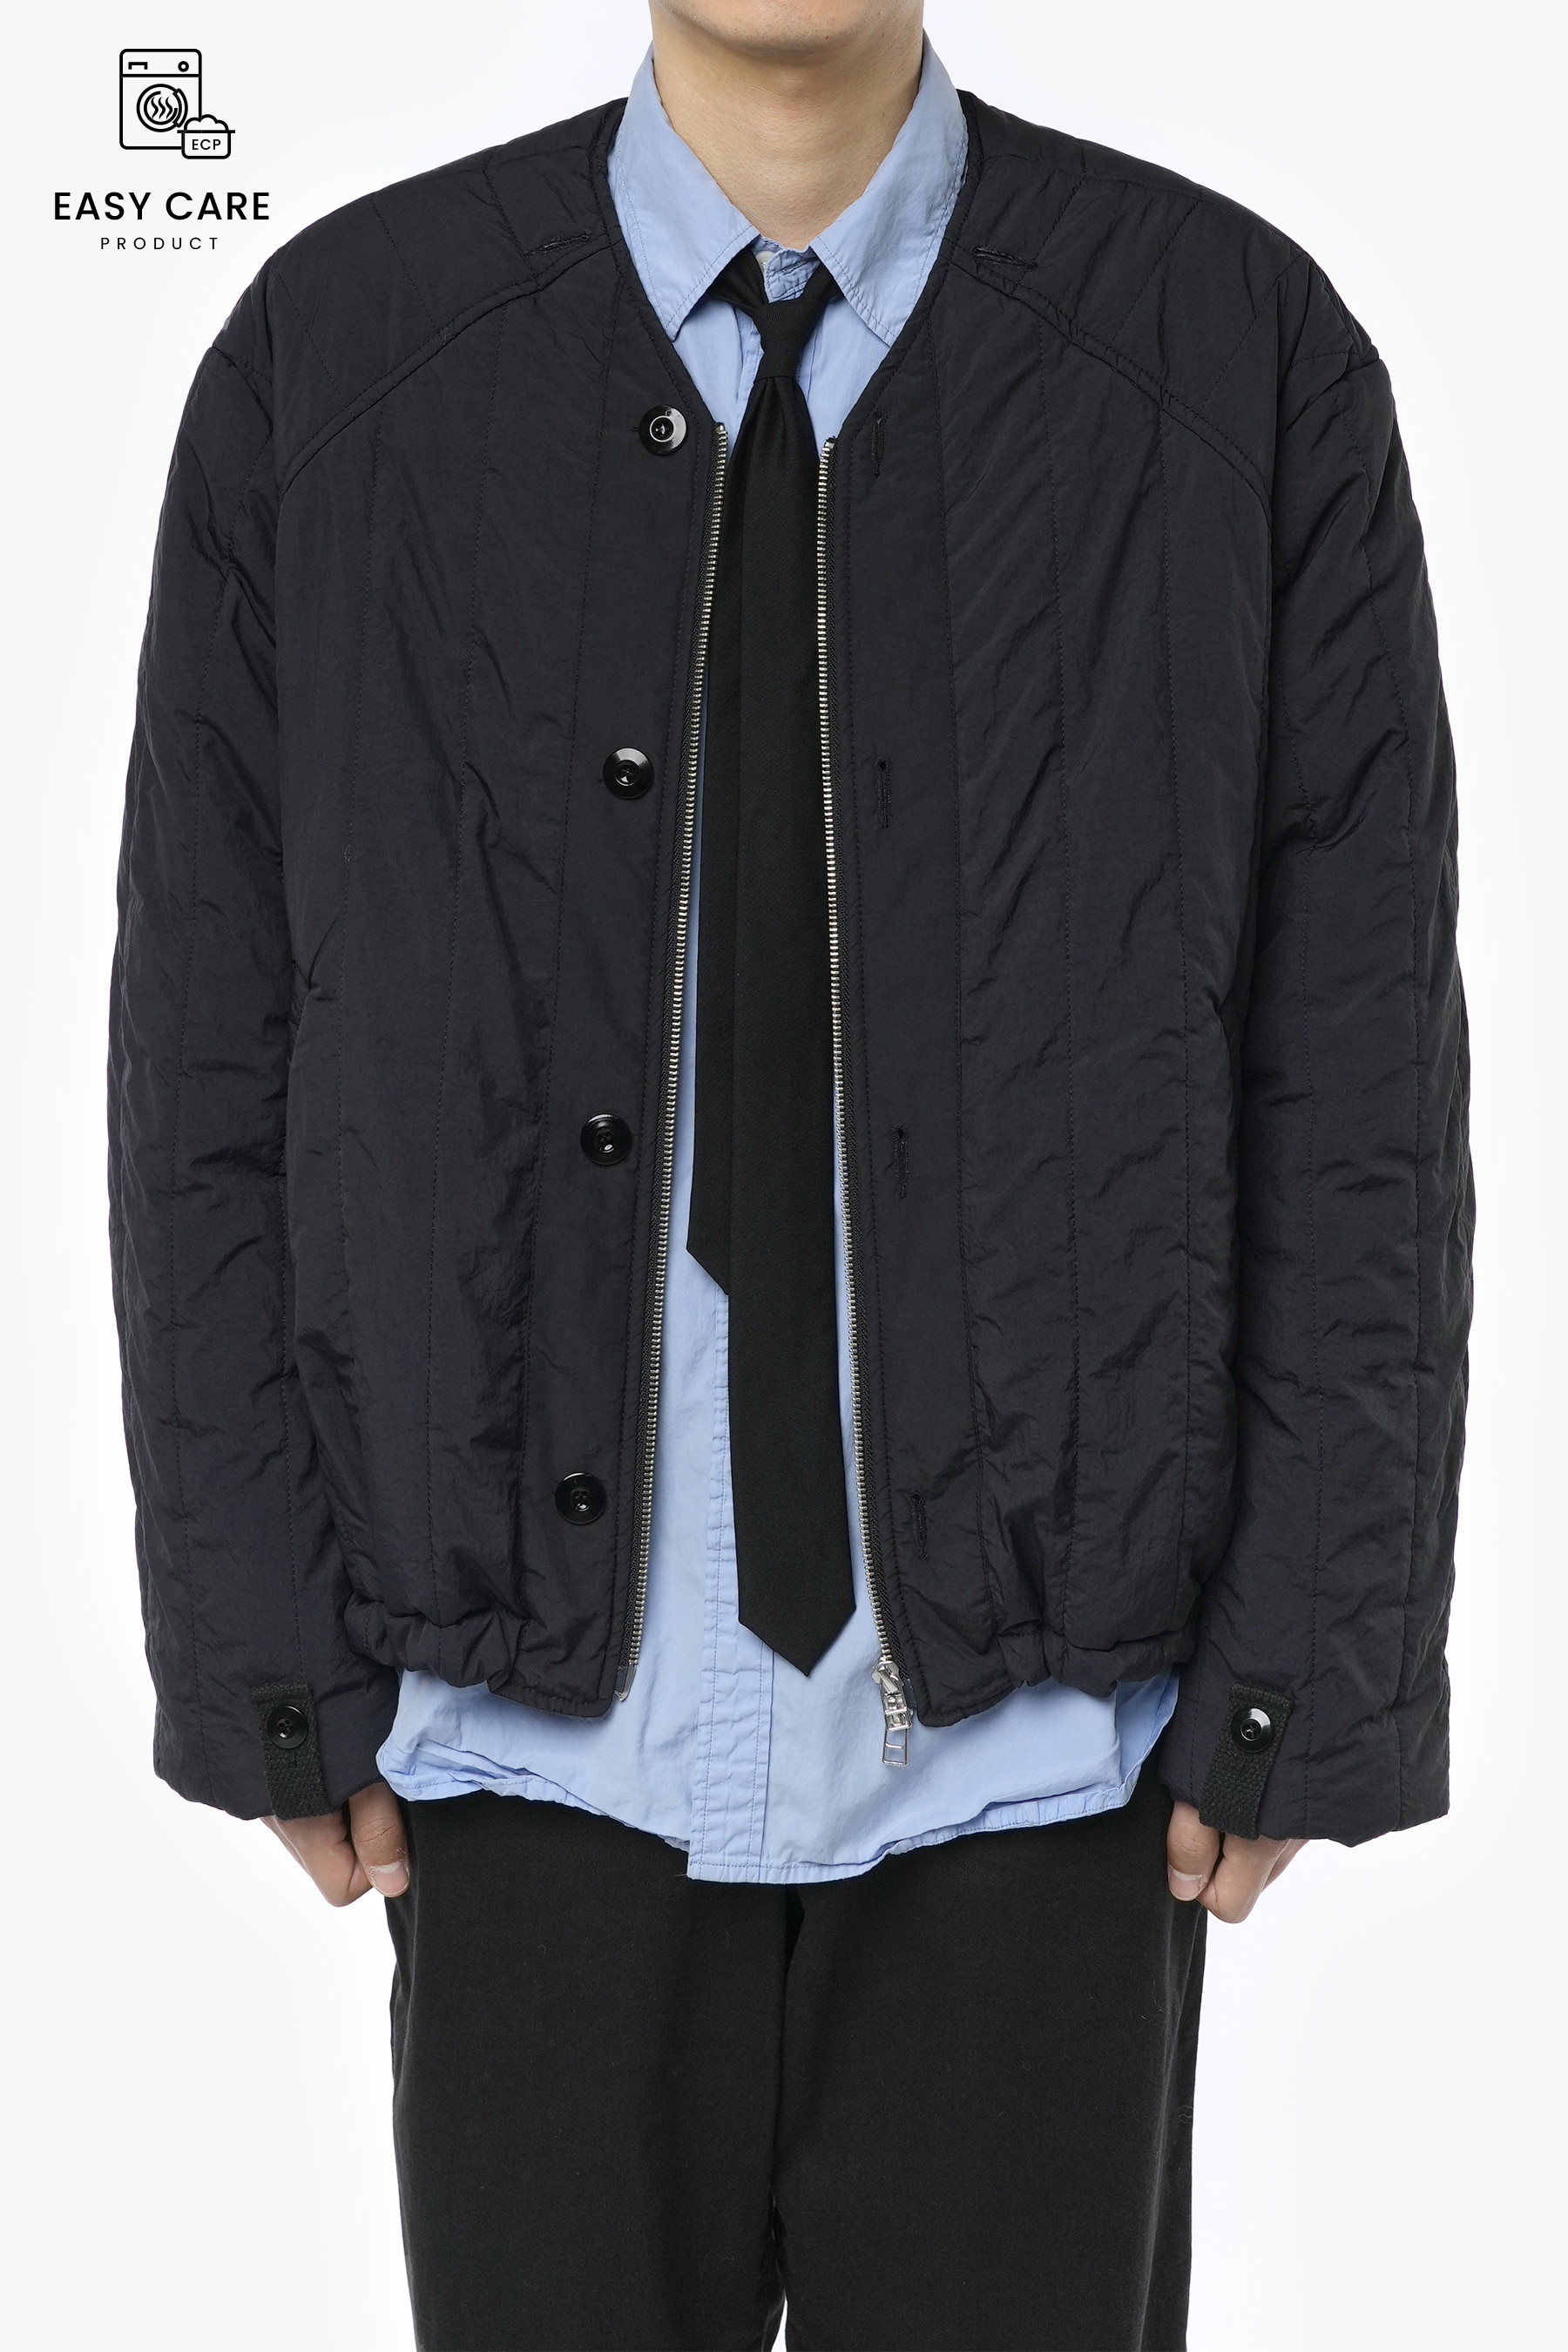 BLACK WASHED QUILTED CARDIGAN (ECP GARMENT PROCESS ONLY MACHINE)